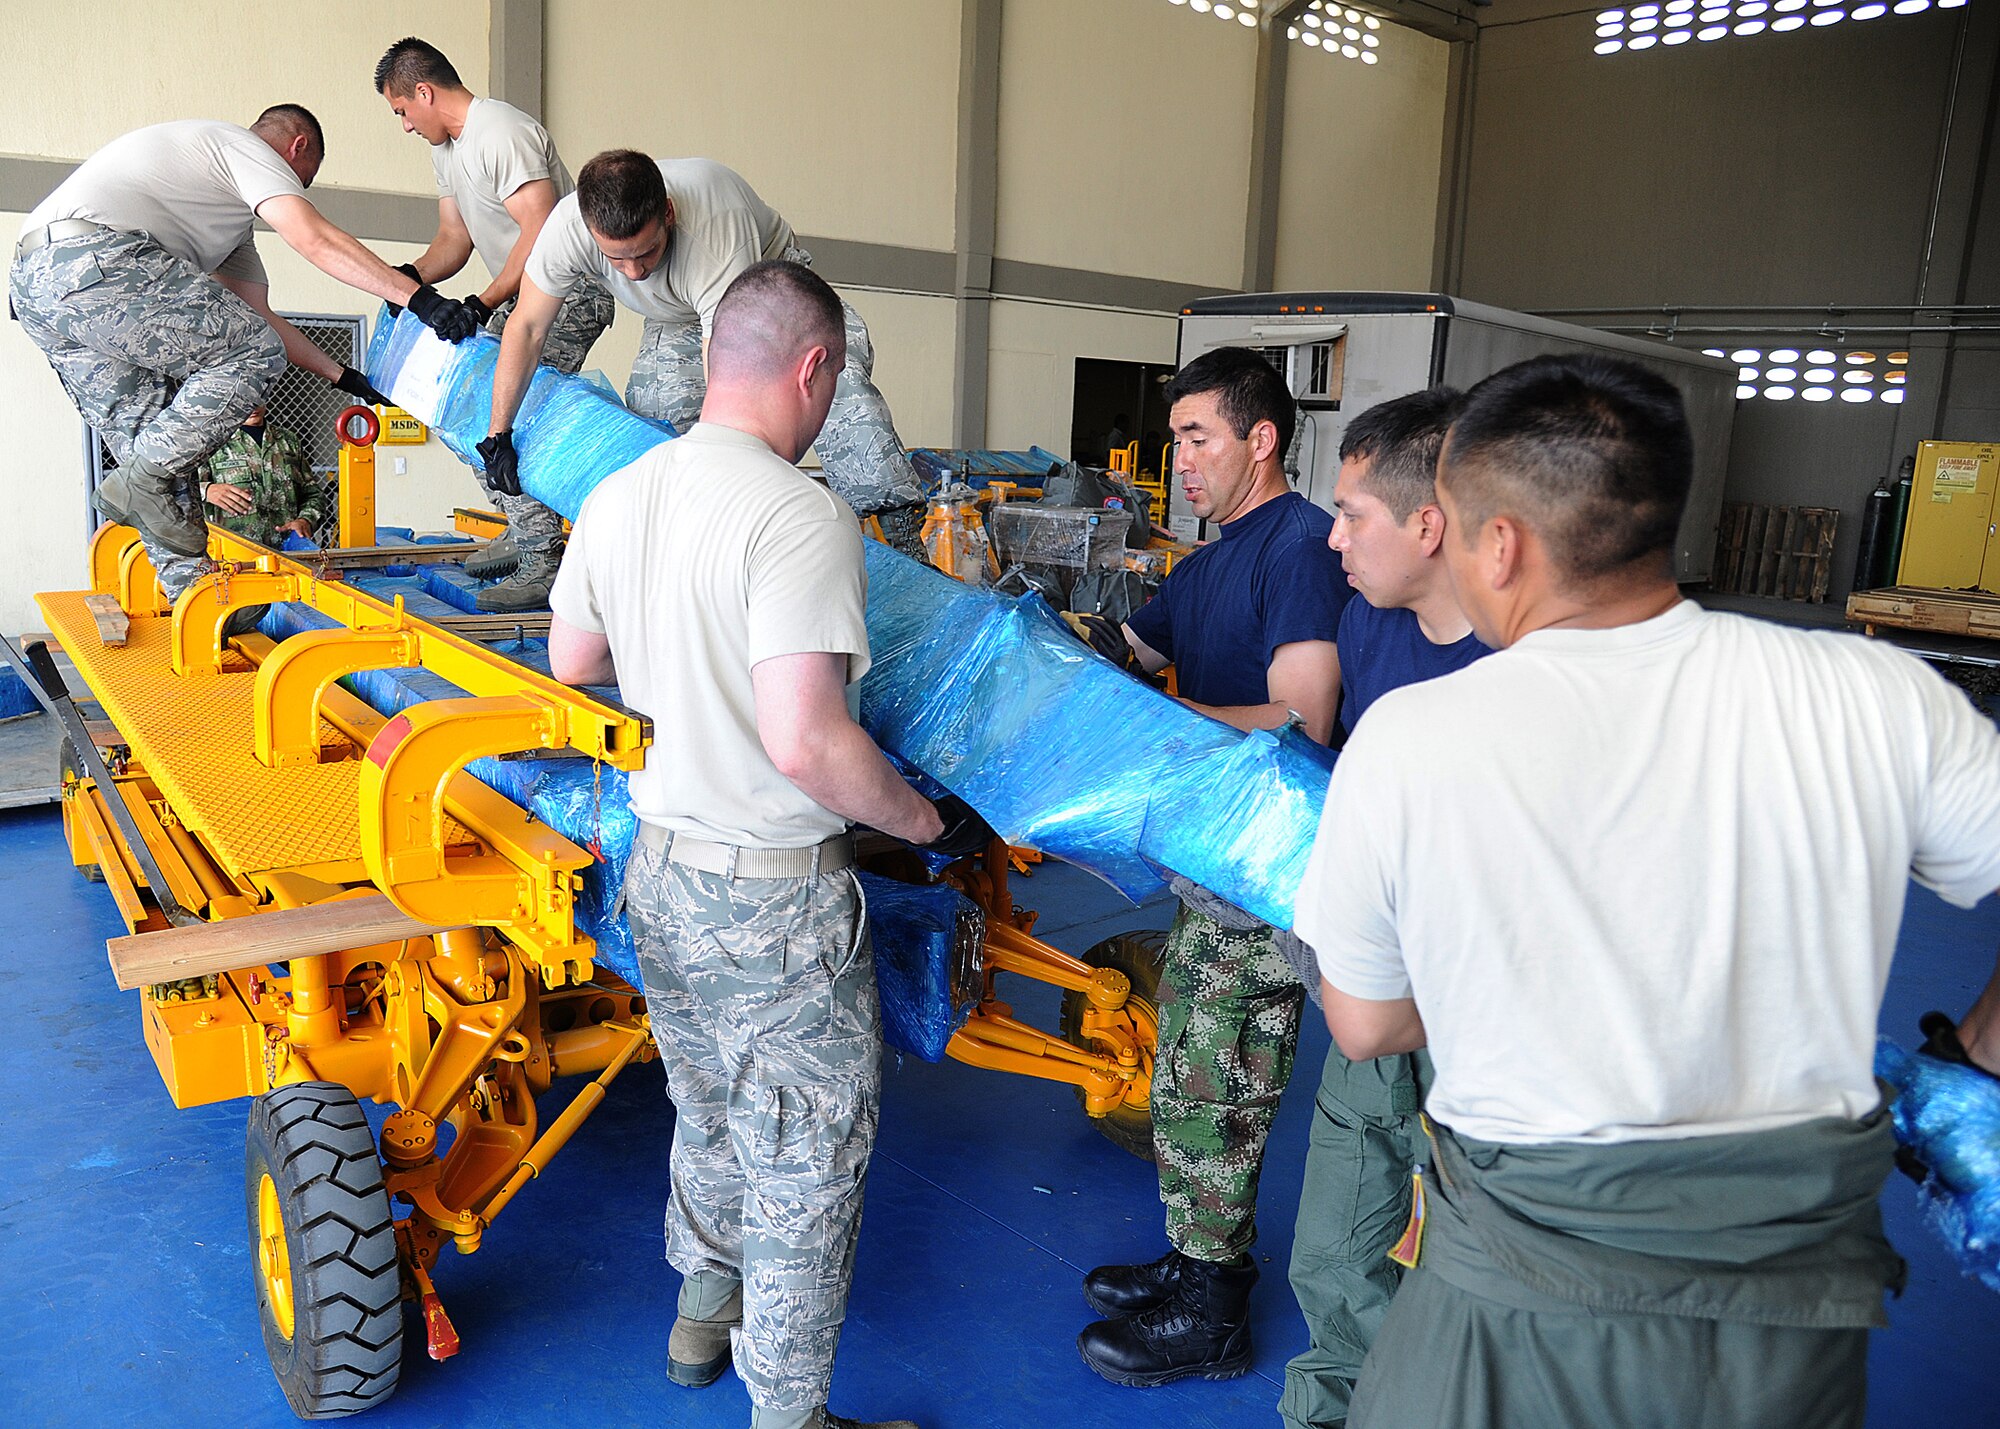 Members of the 571st Mobility Support Advisory Squadron and the Colombian air force, load gear onto rolling stock before weighing and loading it onto an aircraft during an Air Mobility Command Building Partner Capacity mission at General Alberto Pauwels Rodriguez Air Base in Barranquilla, Colombia, June 27.  (U.S. Air Force photo by Tech. Sgt. Lesley Waters)